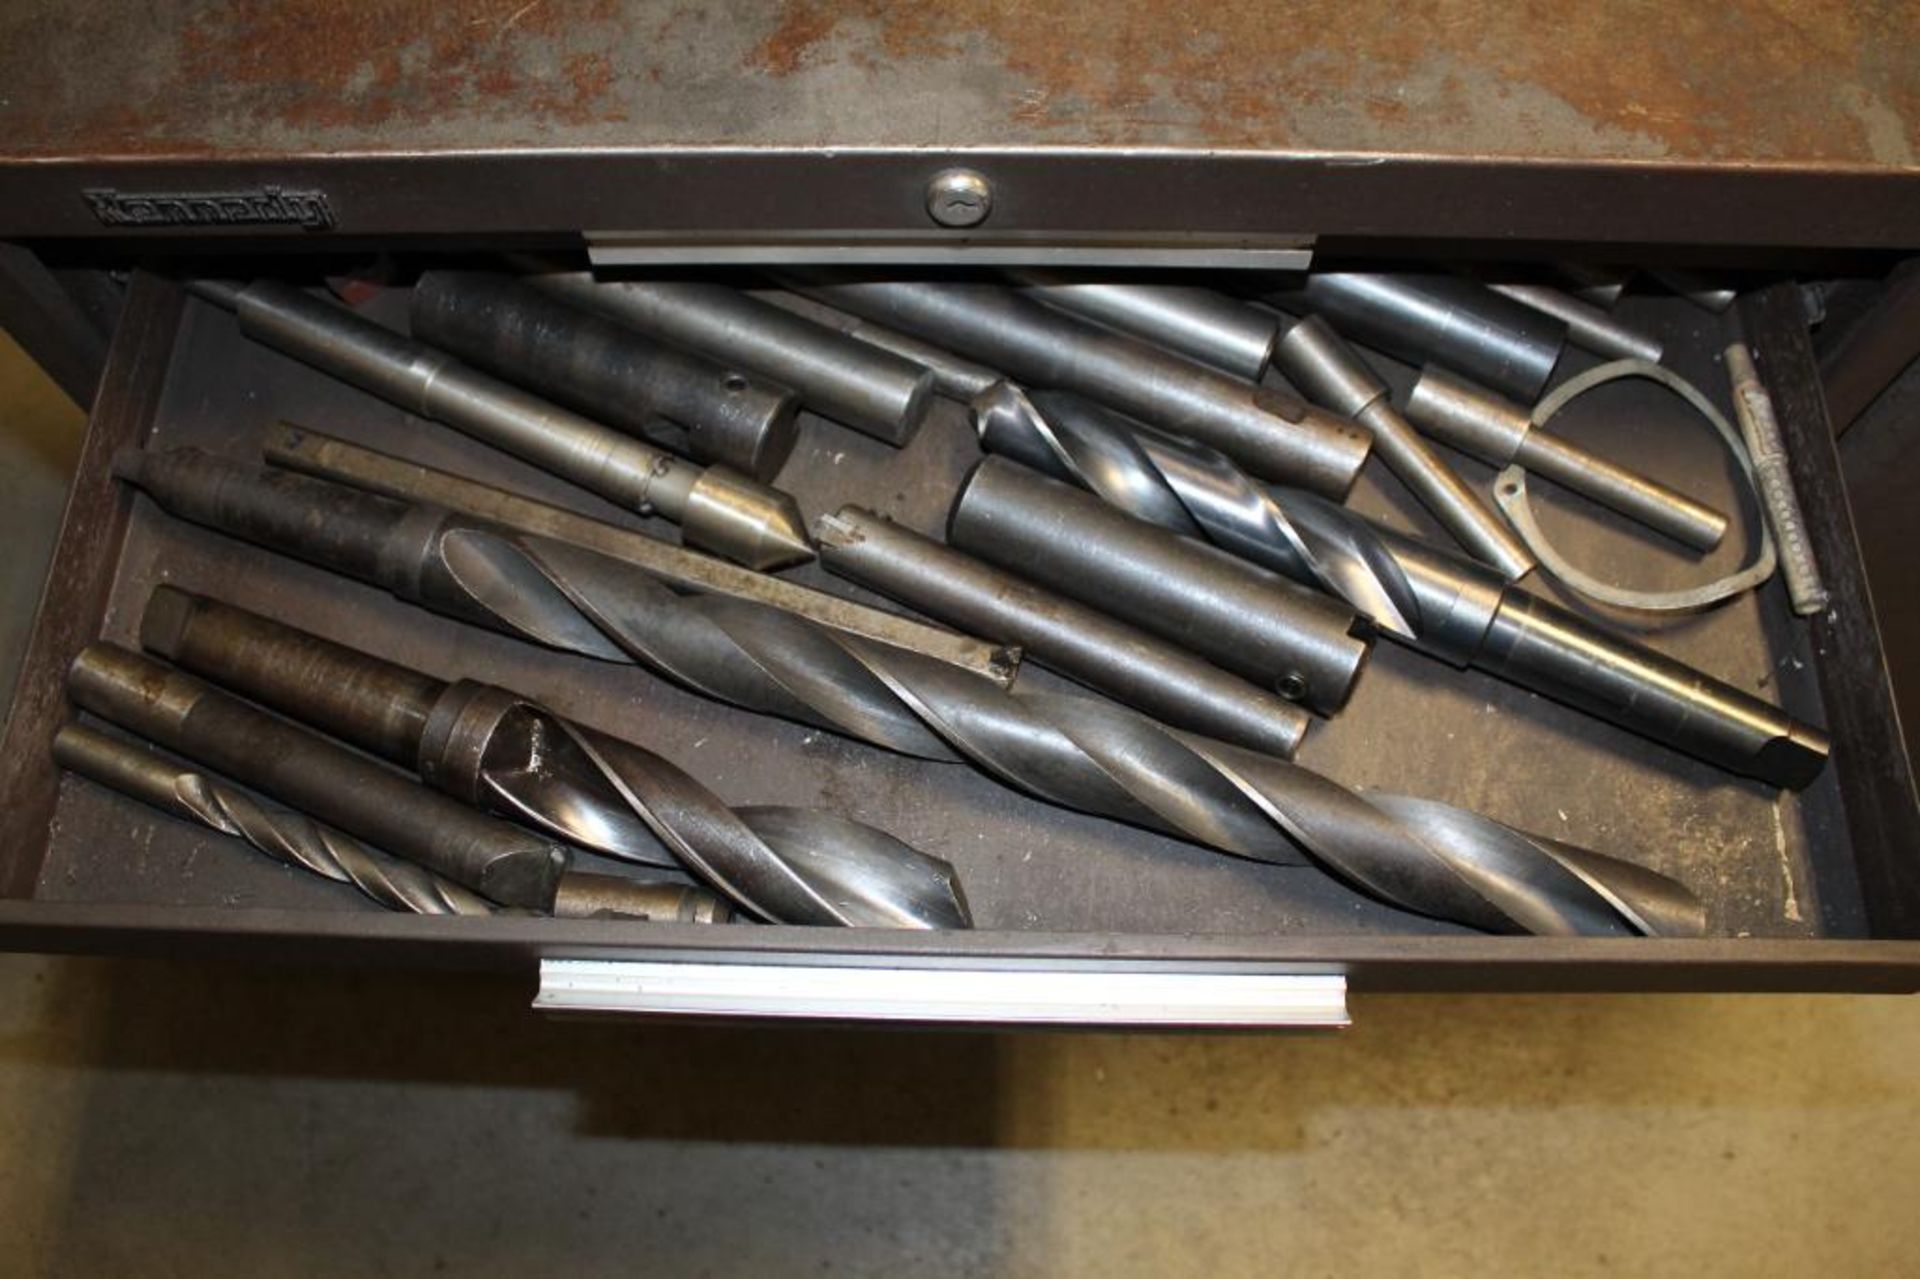 Kennedy Toolbox, Includes Contents - Milling Bits, Taps, Drill Bits - Image 5 of 7